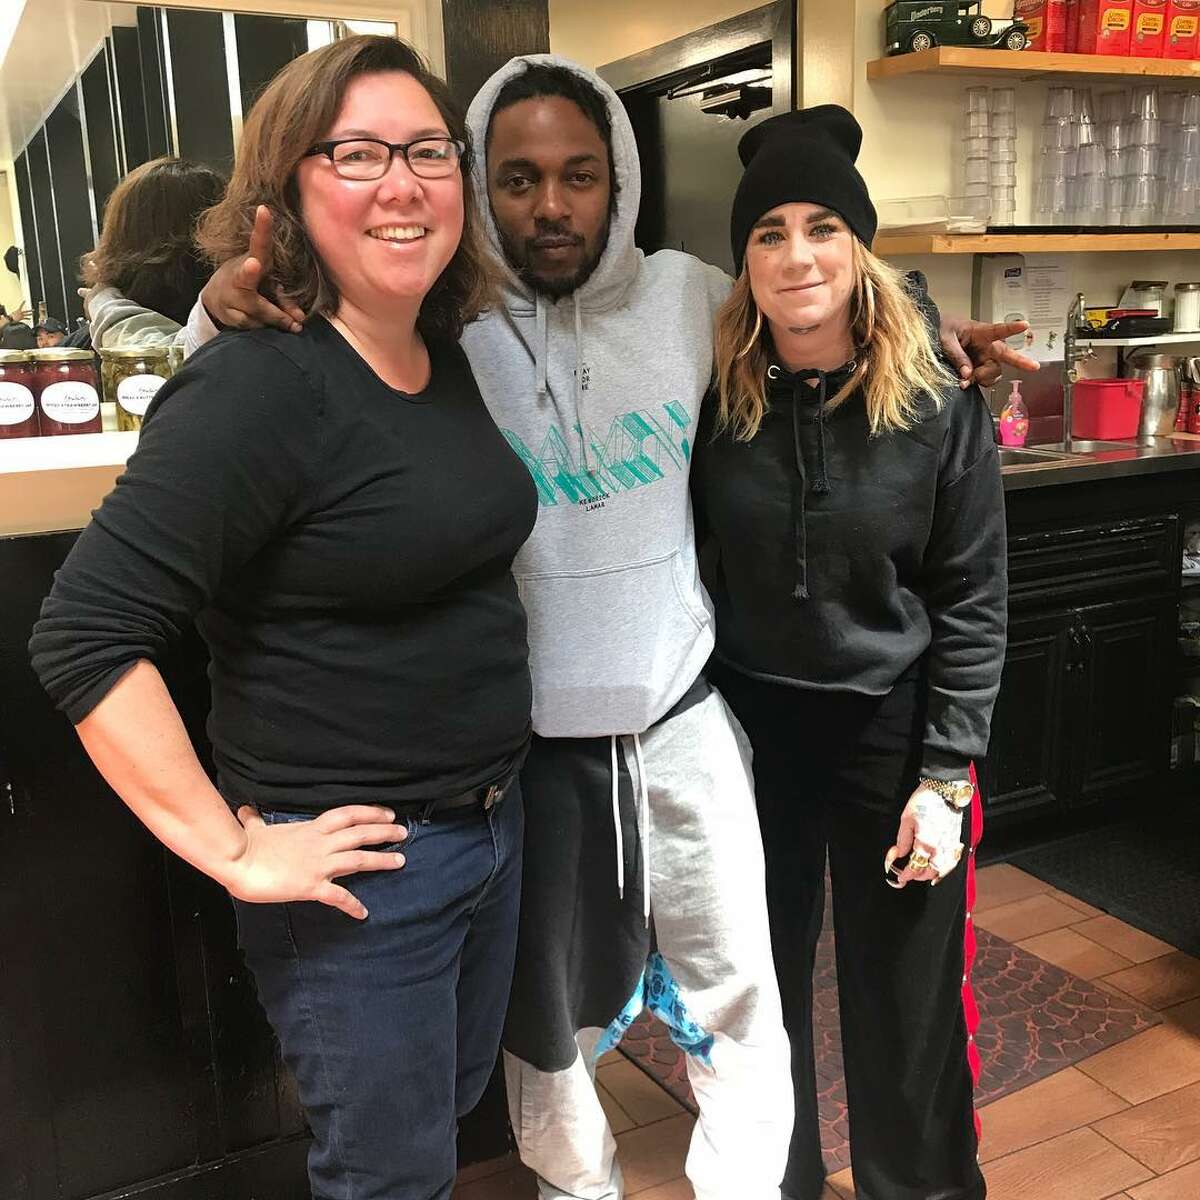 Rapper Kendrick Lamar stopped into Brenda's Soul Food on Tuesday while in town for his show at the Oracle Arena on Wednesday.